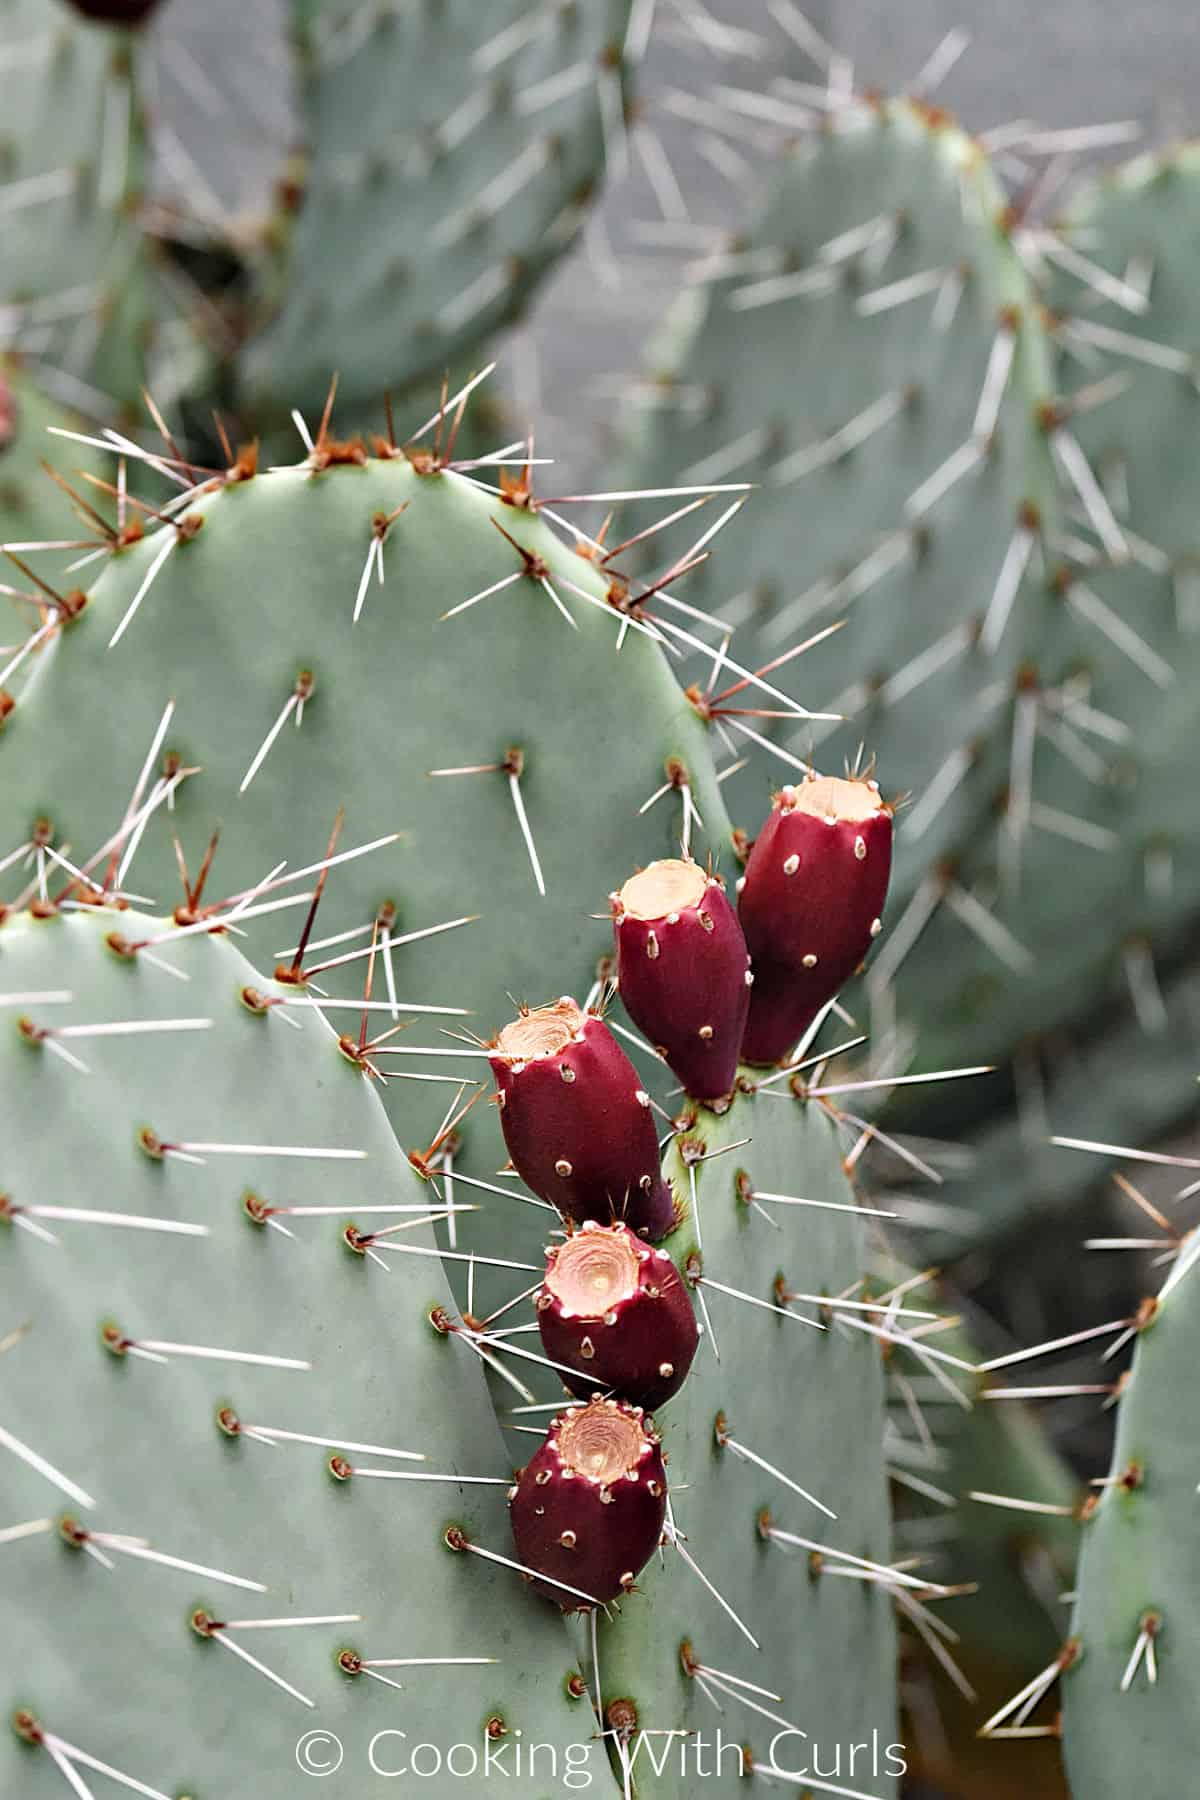 Image of a prickly pear cactus with bright red fruit.